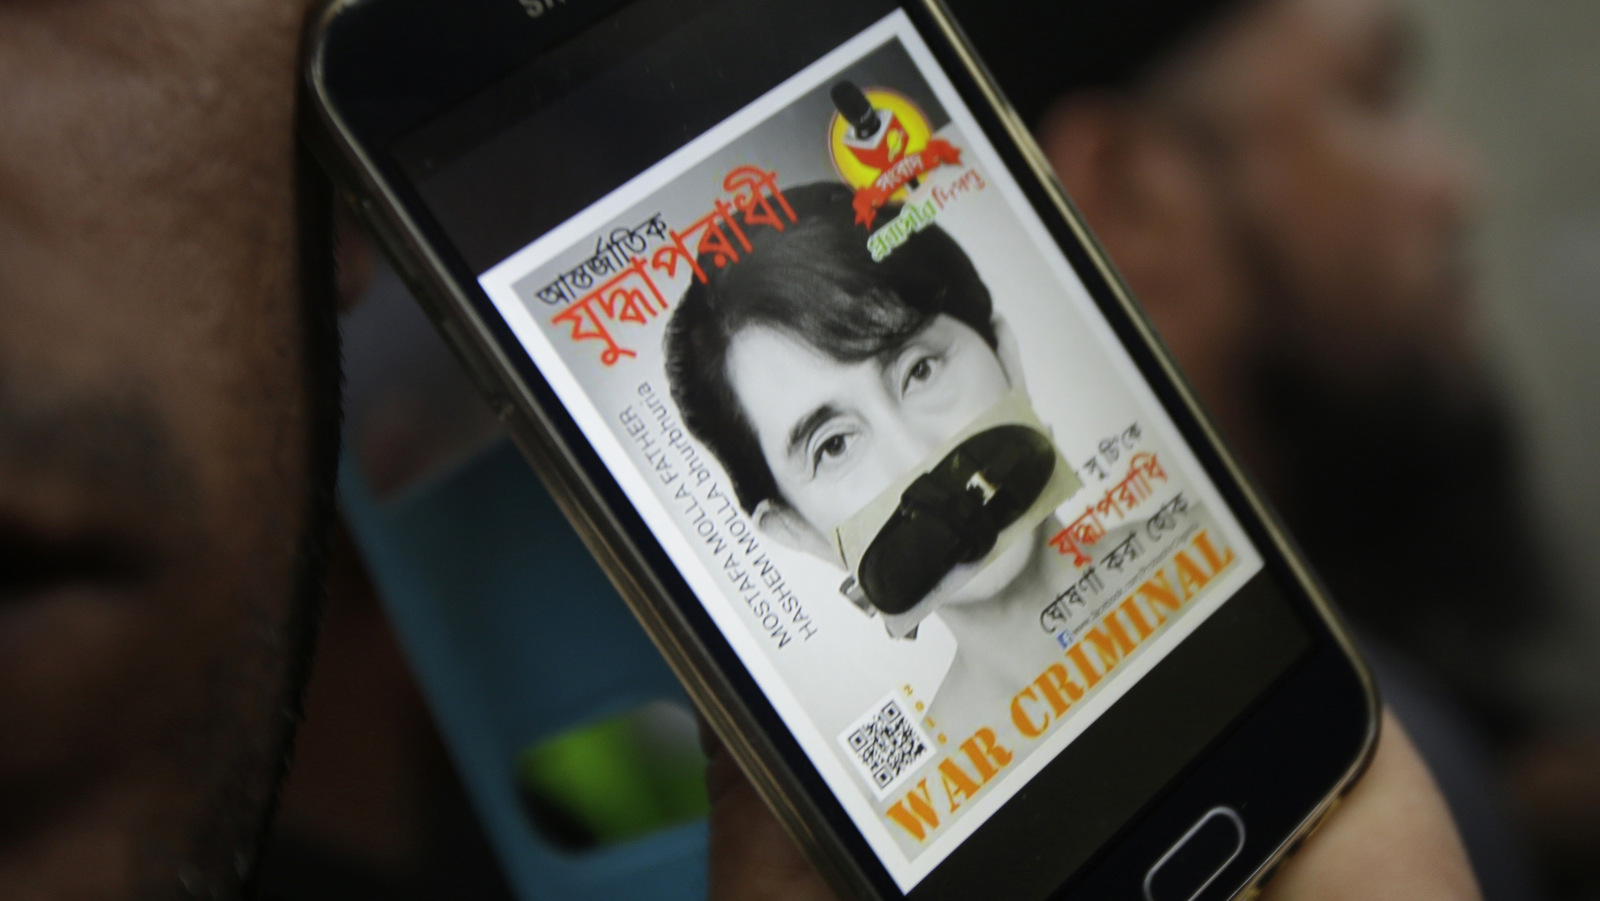 A portrait of Myanmar's Foreign Minister Aung San Suu Kyi with her mouth covered with a sandal displayed on a mobile phone screen is shown by a protester during a demonstration in front of the Myanmar Embassy in Bangkok, Thailand, Friday, Nov. 25, 2016 against the murder, displacement and persecution of Muslim Rohingya in Myanmar. (AP Photo/Sakchai Lalit)